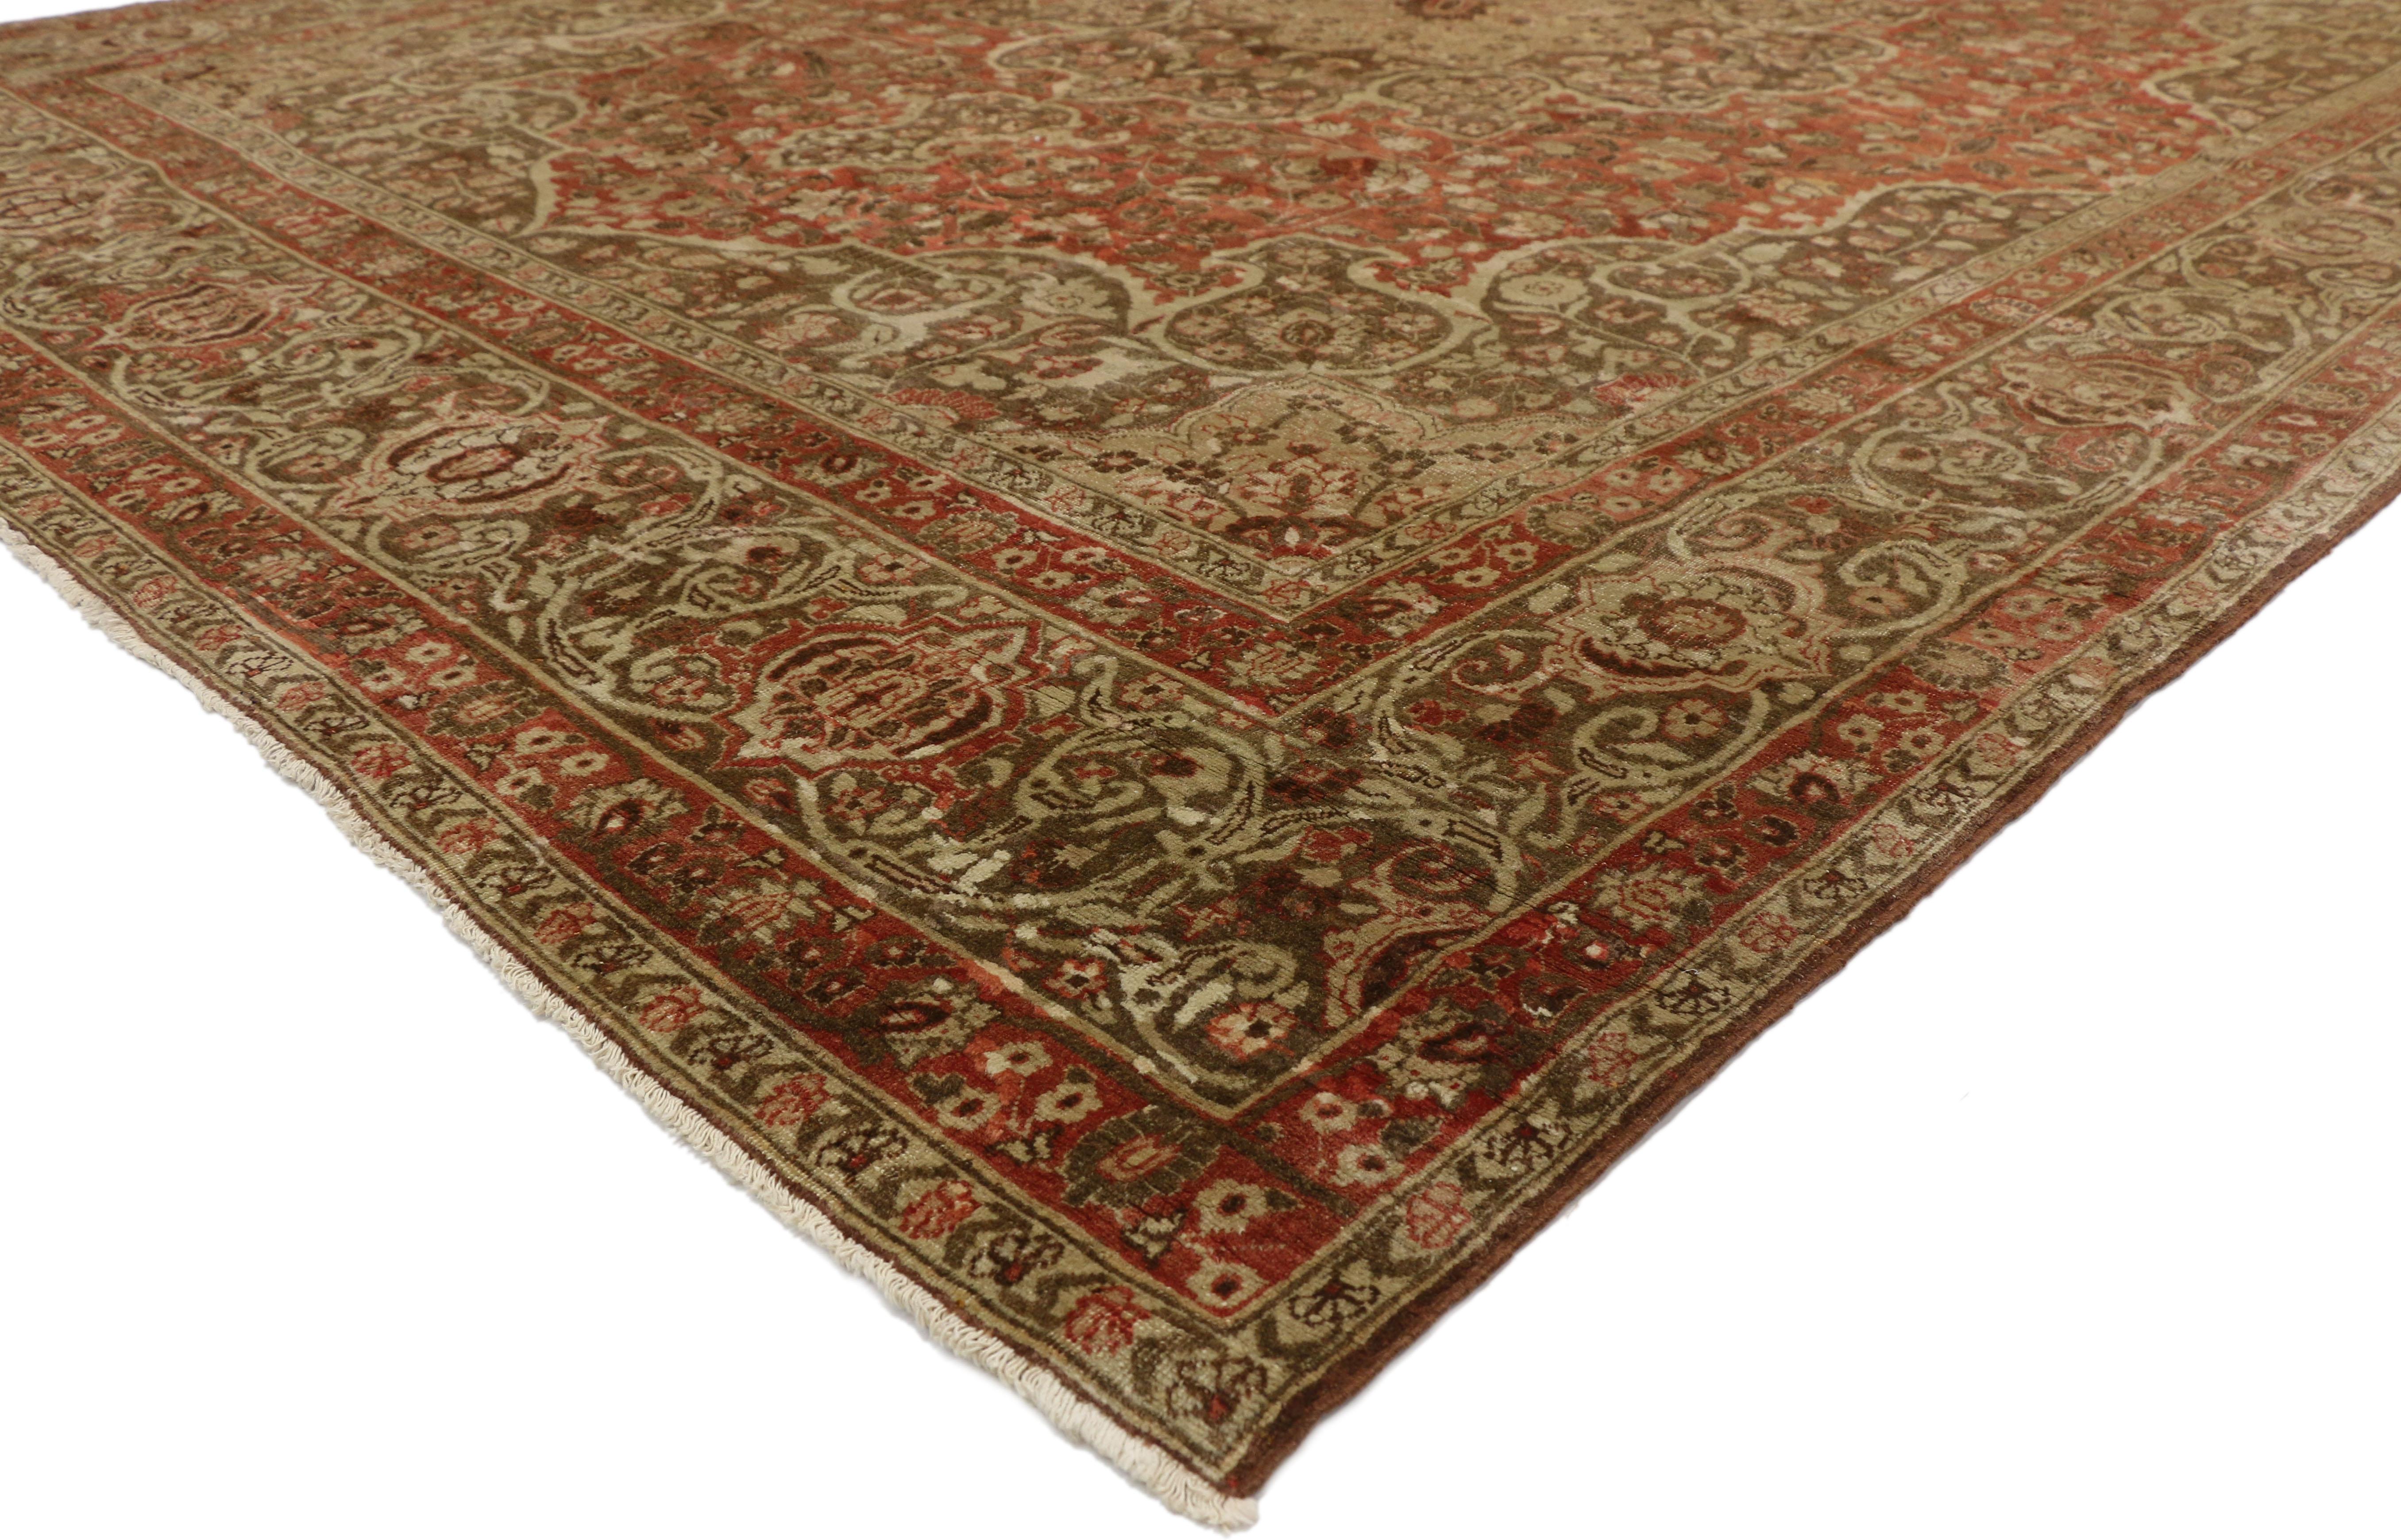 50392 Haji Khalili Antique Persian Tabriz Area rug with Rustic Art Nouveau style. This Haji Khalili antique Persian Tabriz area rug features an eight-point beige medallion floating inside a brown cusped trefoil center medallion anchored with finials